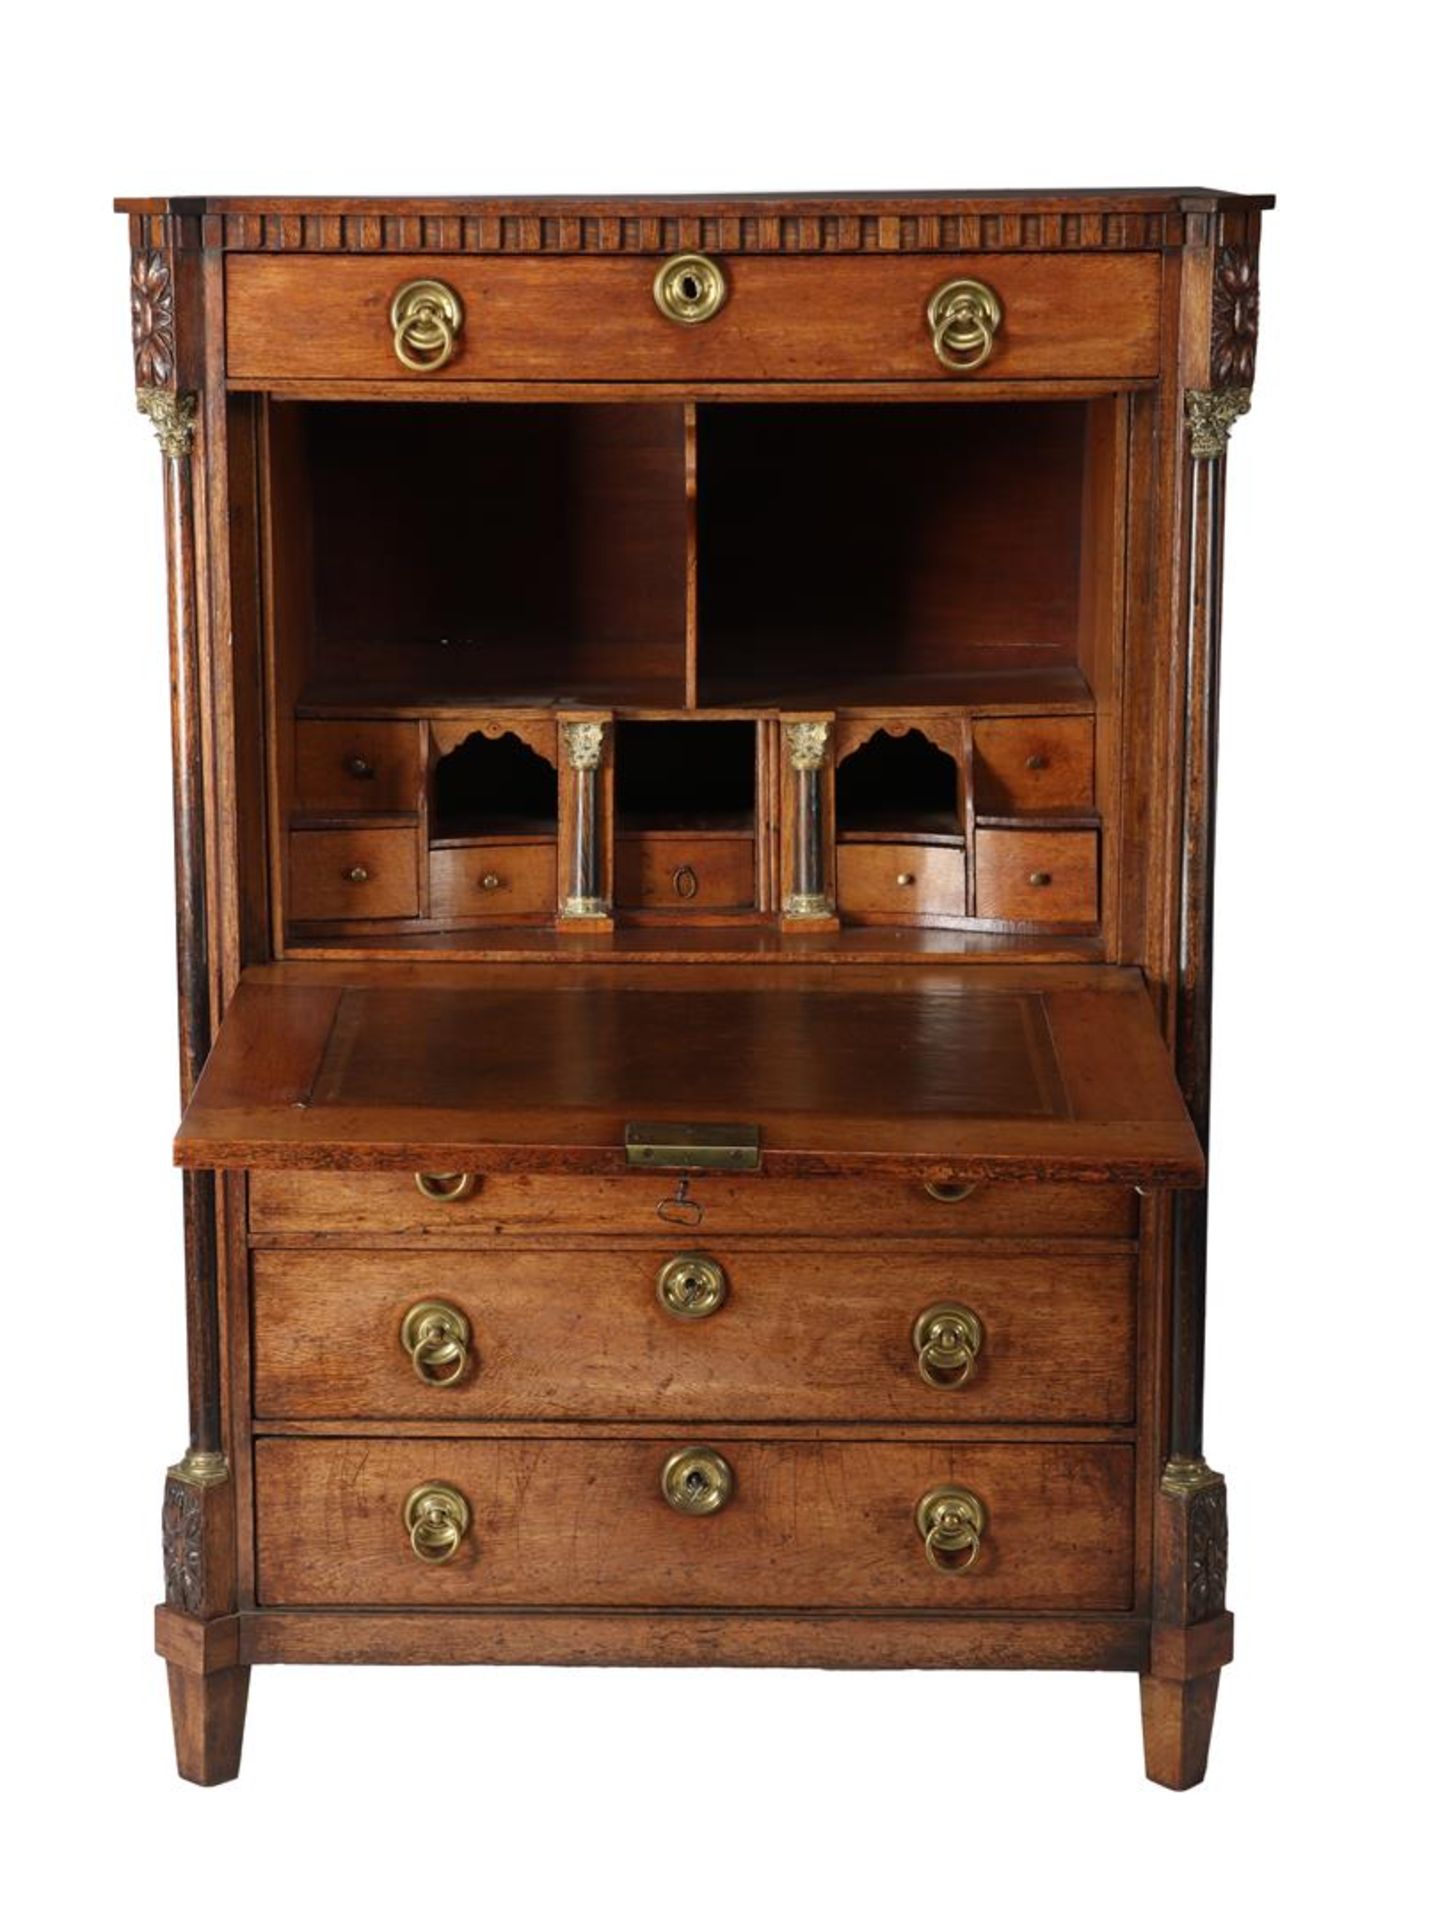 Oak secretary with beautiful nesting behind the flap with many drawers